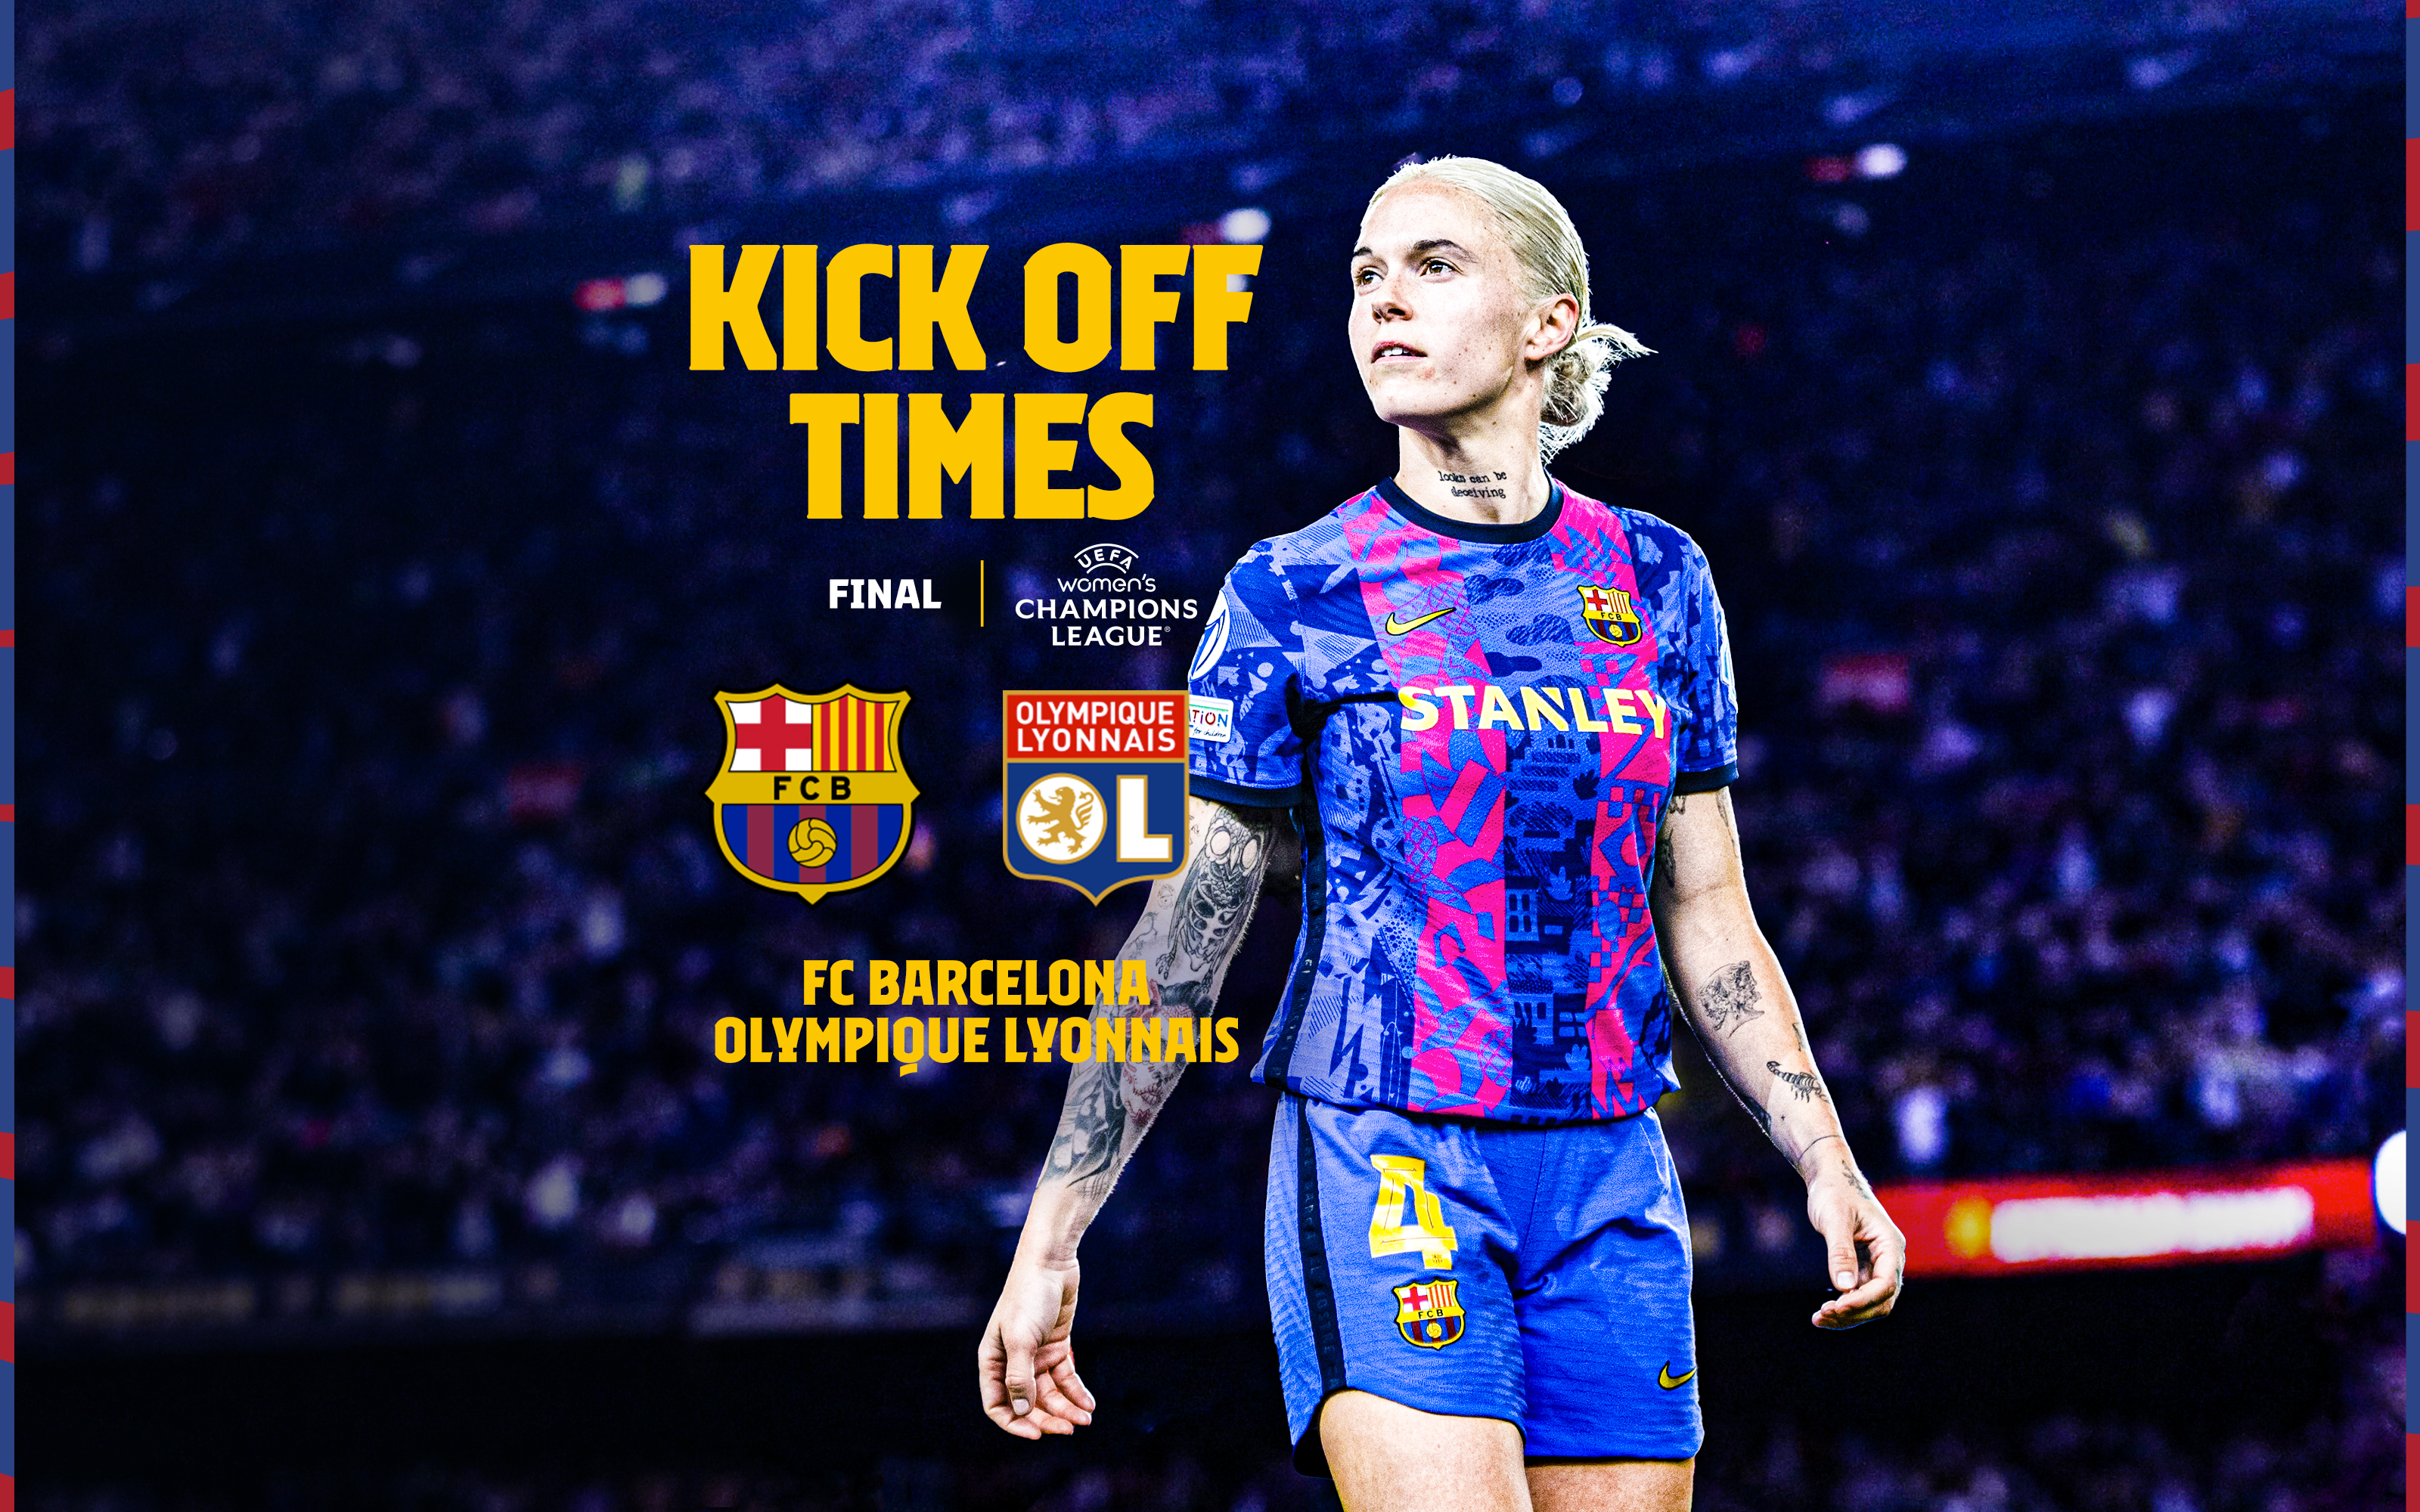 When and where to watch the Womens Champions league final between FC Barcelona Women and Olympique Lyonnais Féminin